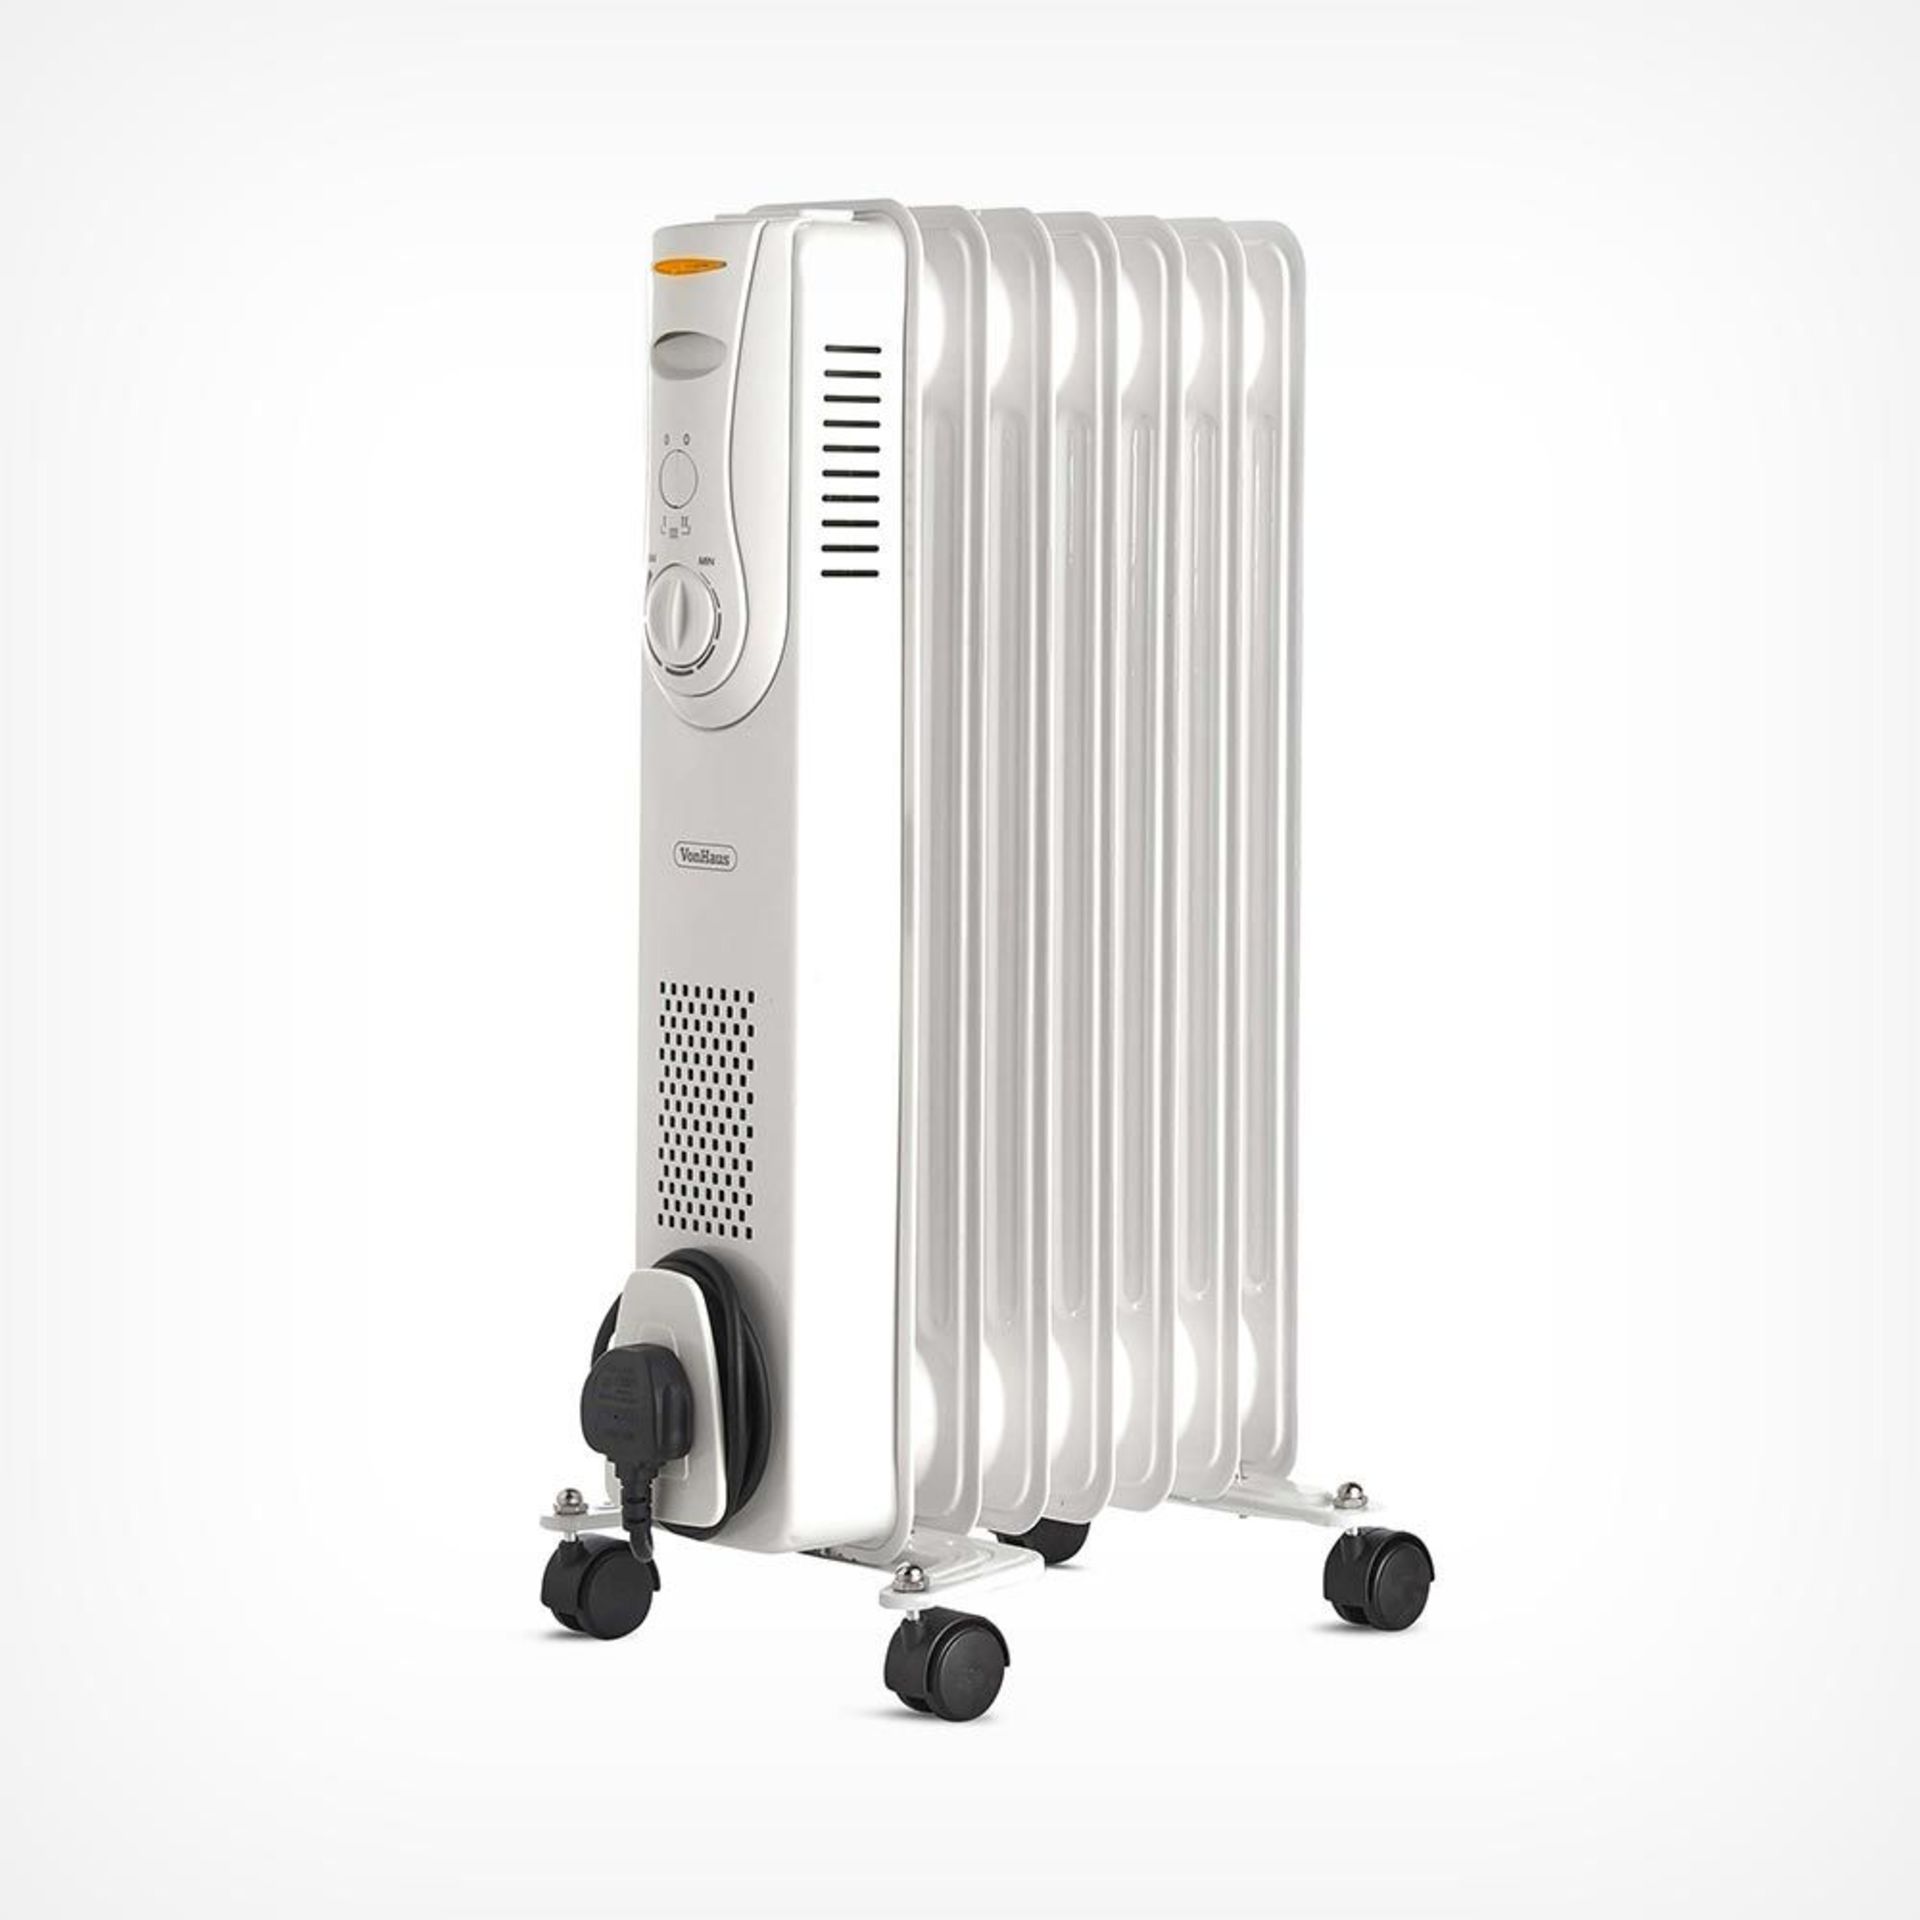 (H66) 7 Fin 1500W Oil Filled Radiator - White Powerful 1500W radiator with 7 oil-filled fins ?...